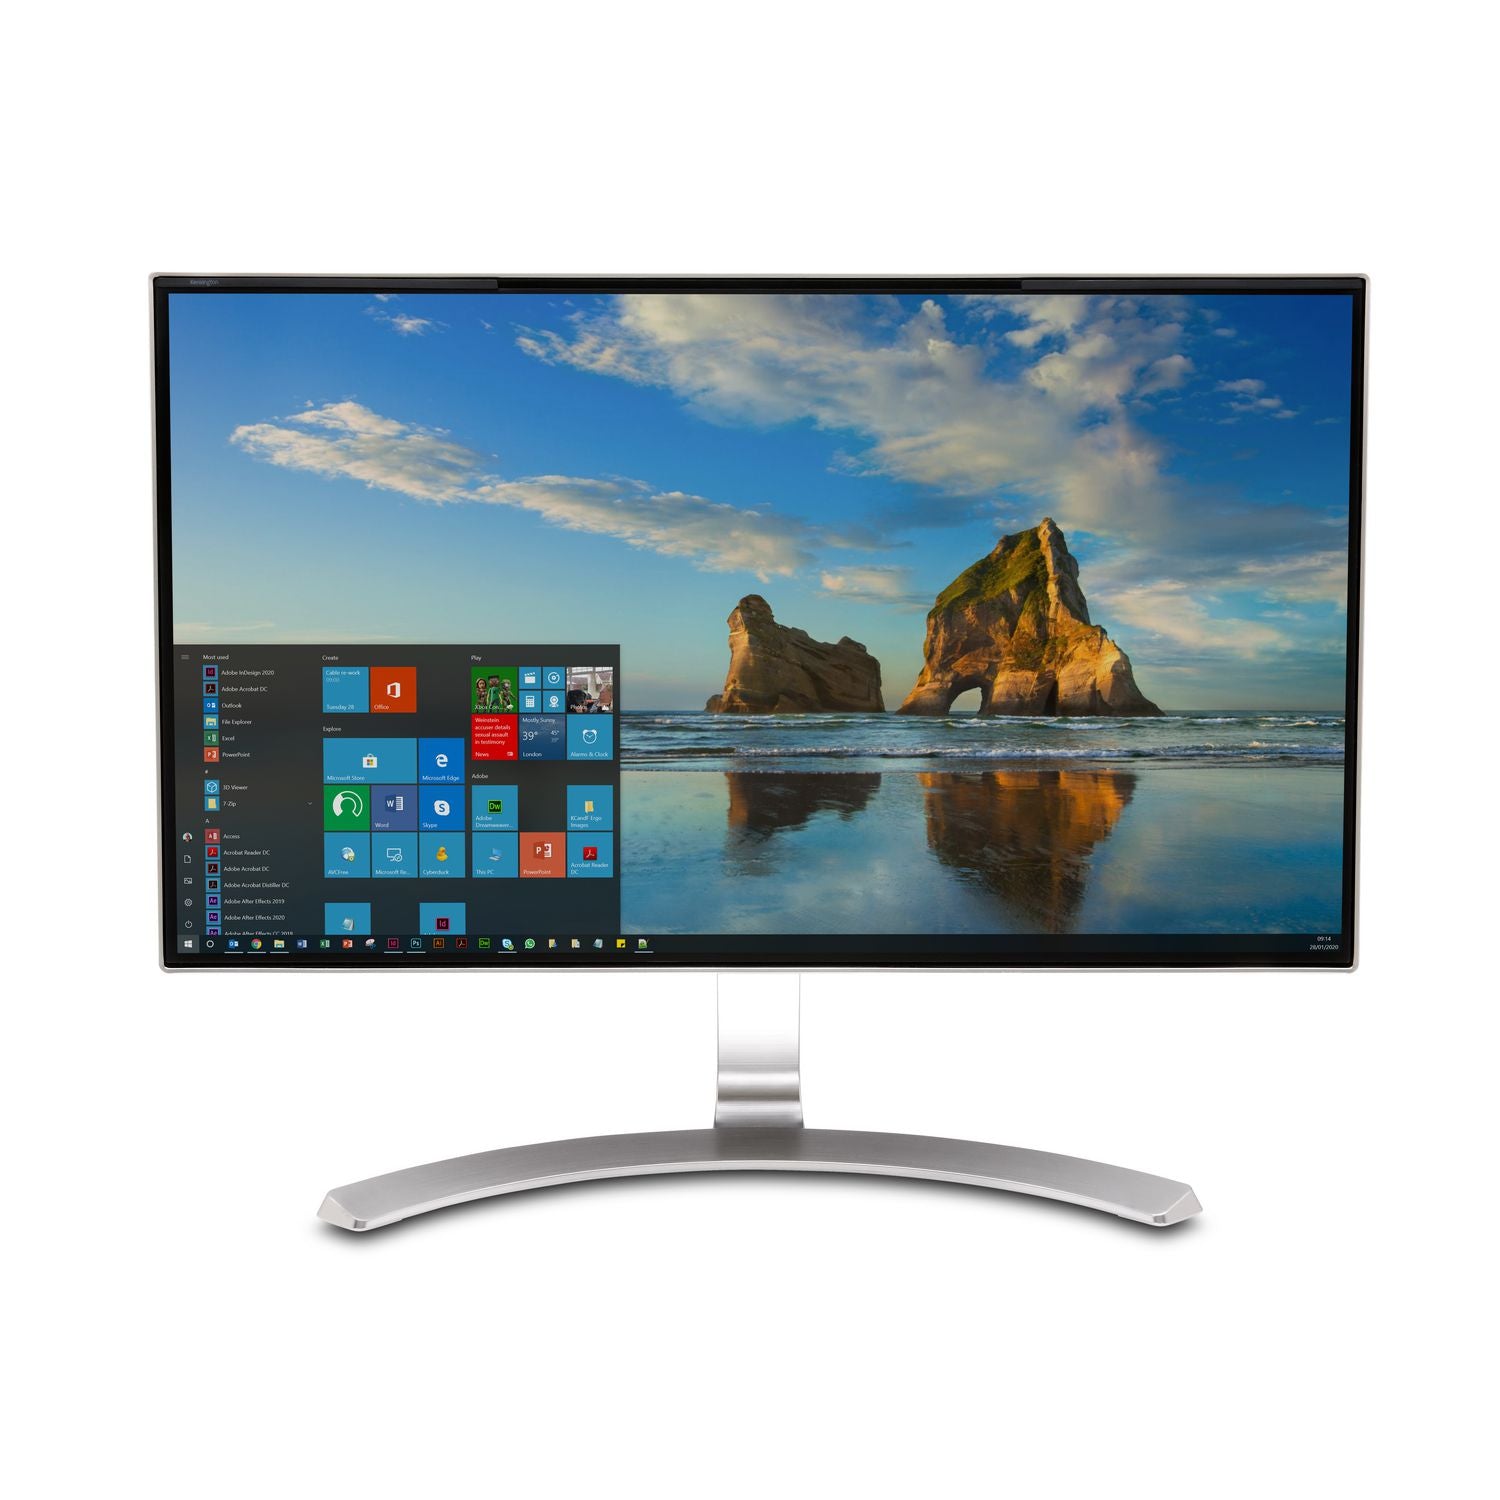 magnetic-monitor-privacy-screen-for-24-widescreen-flat-panel-monitors-1610-aspect-ratio_kmw58358 - 2